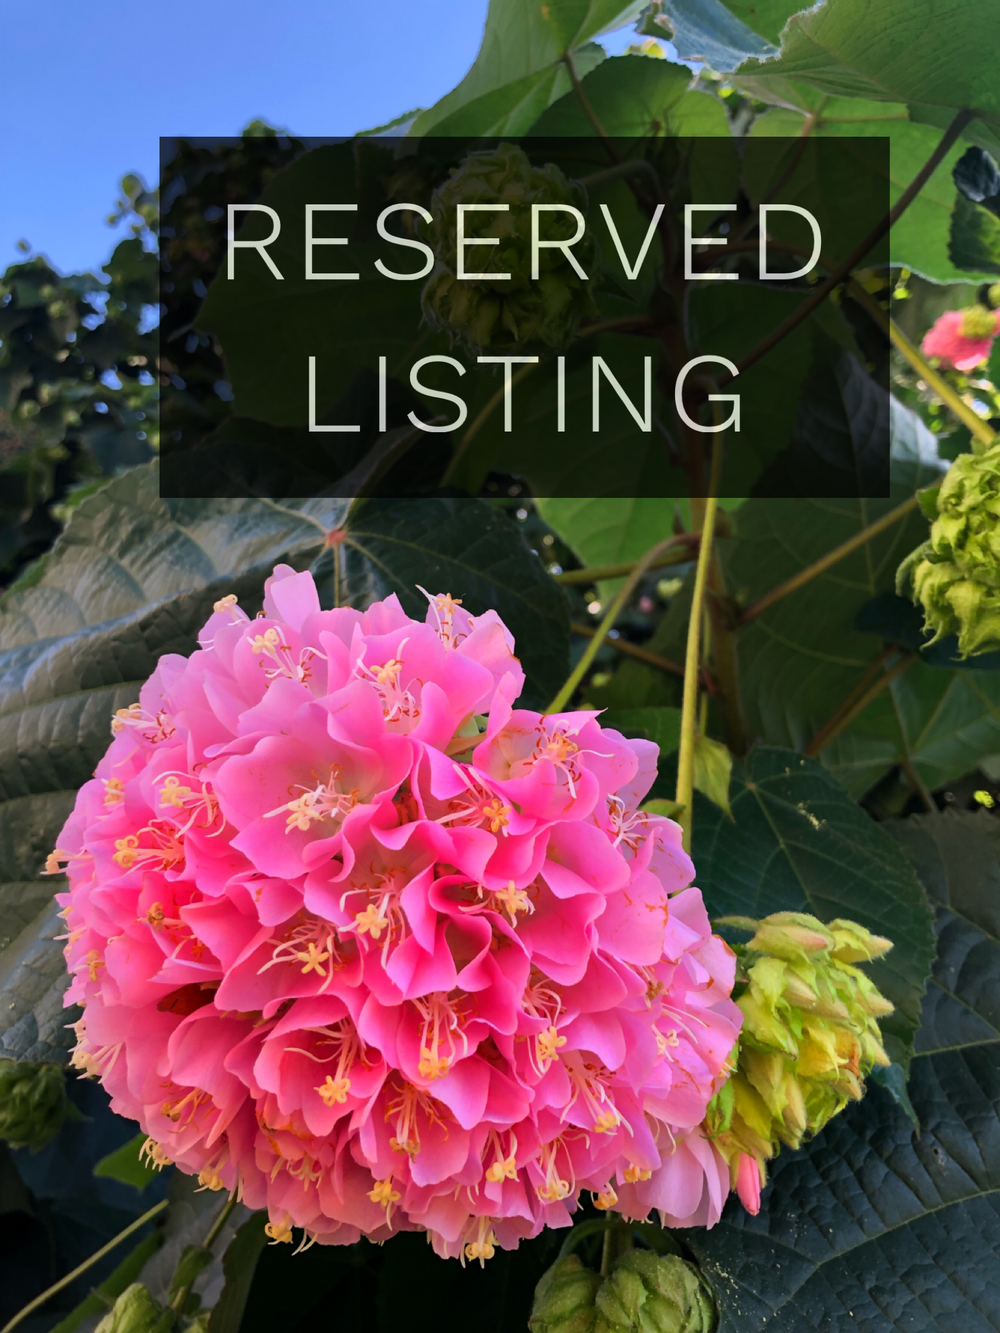 RESERVED LISTING - lilbananiscrystals